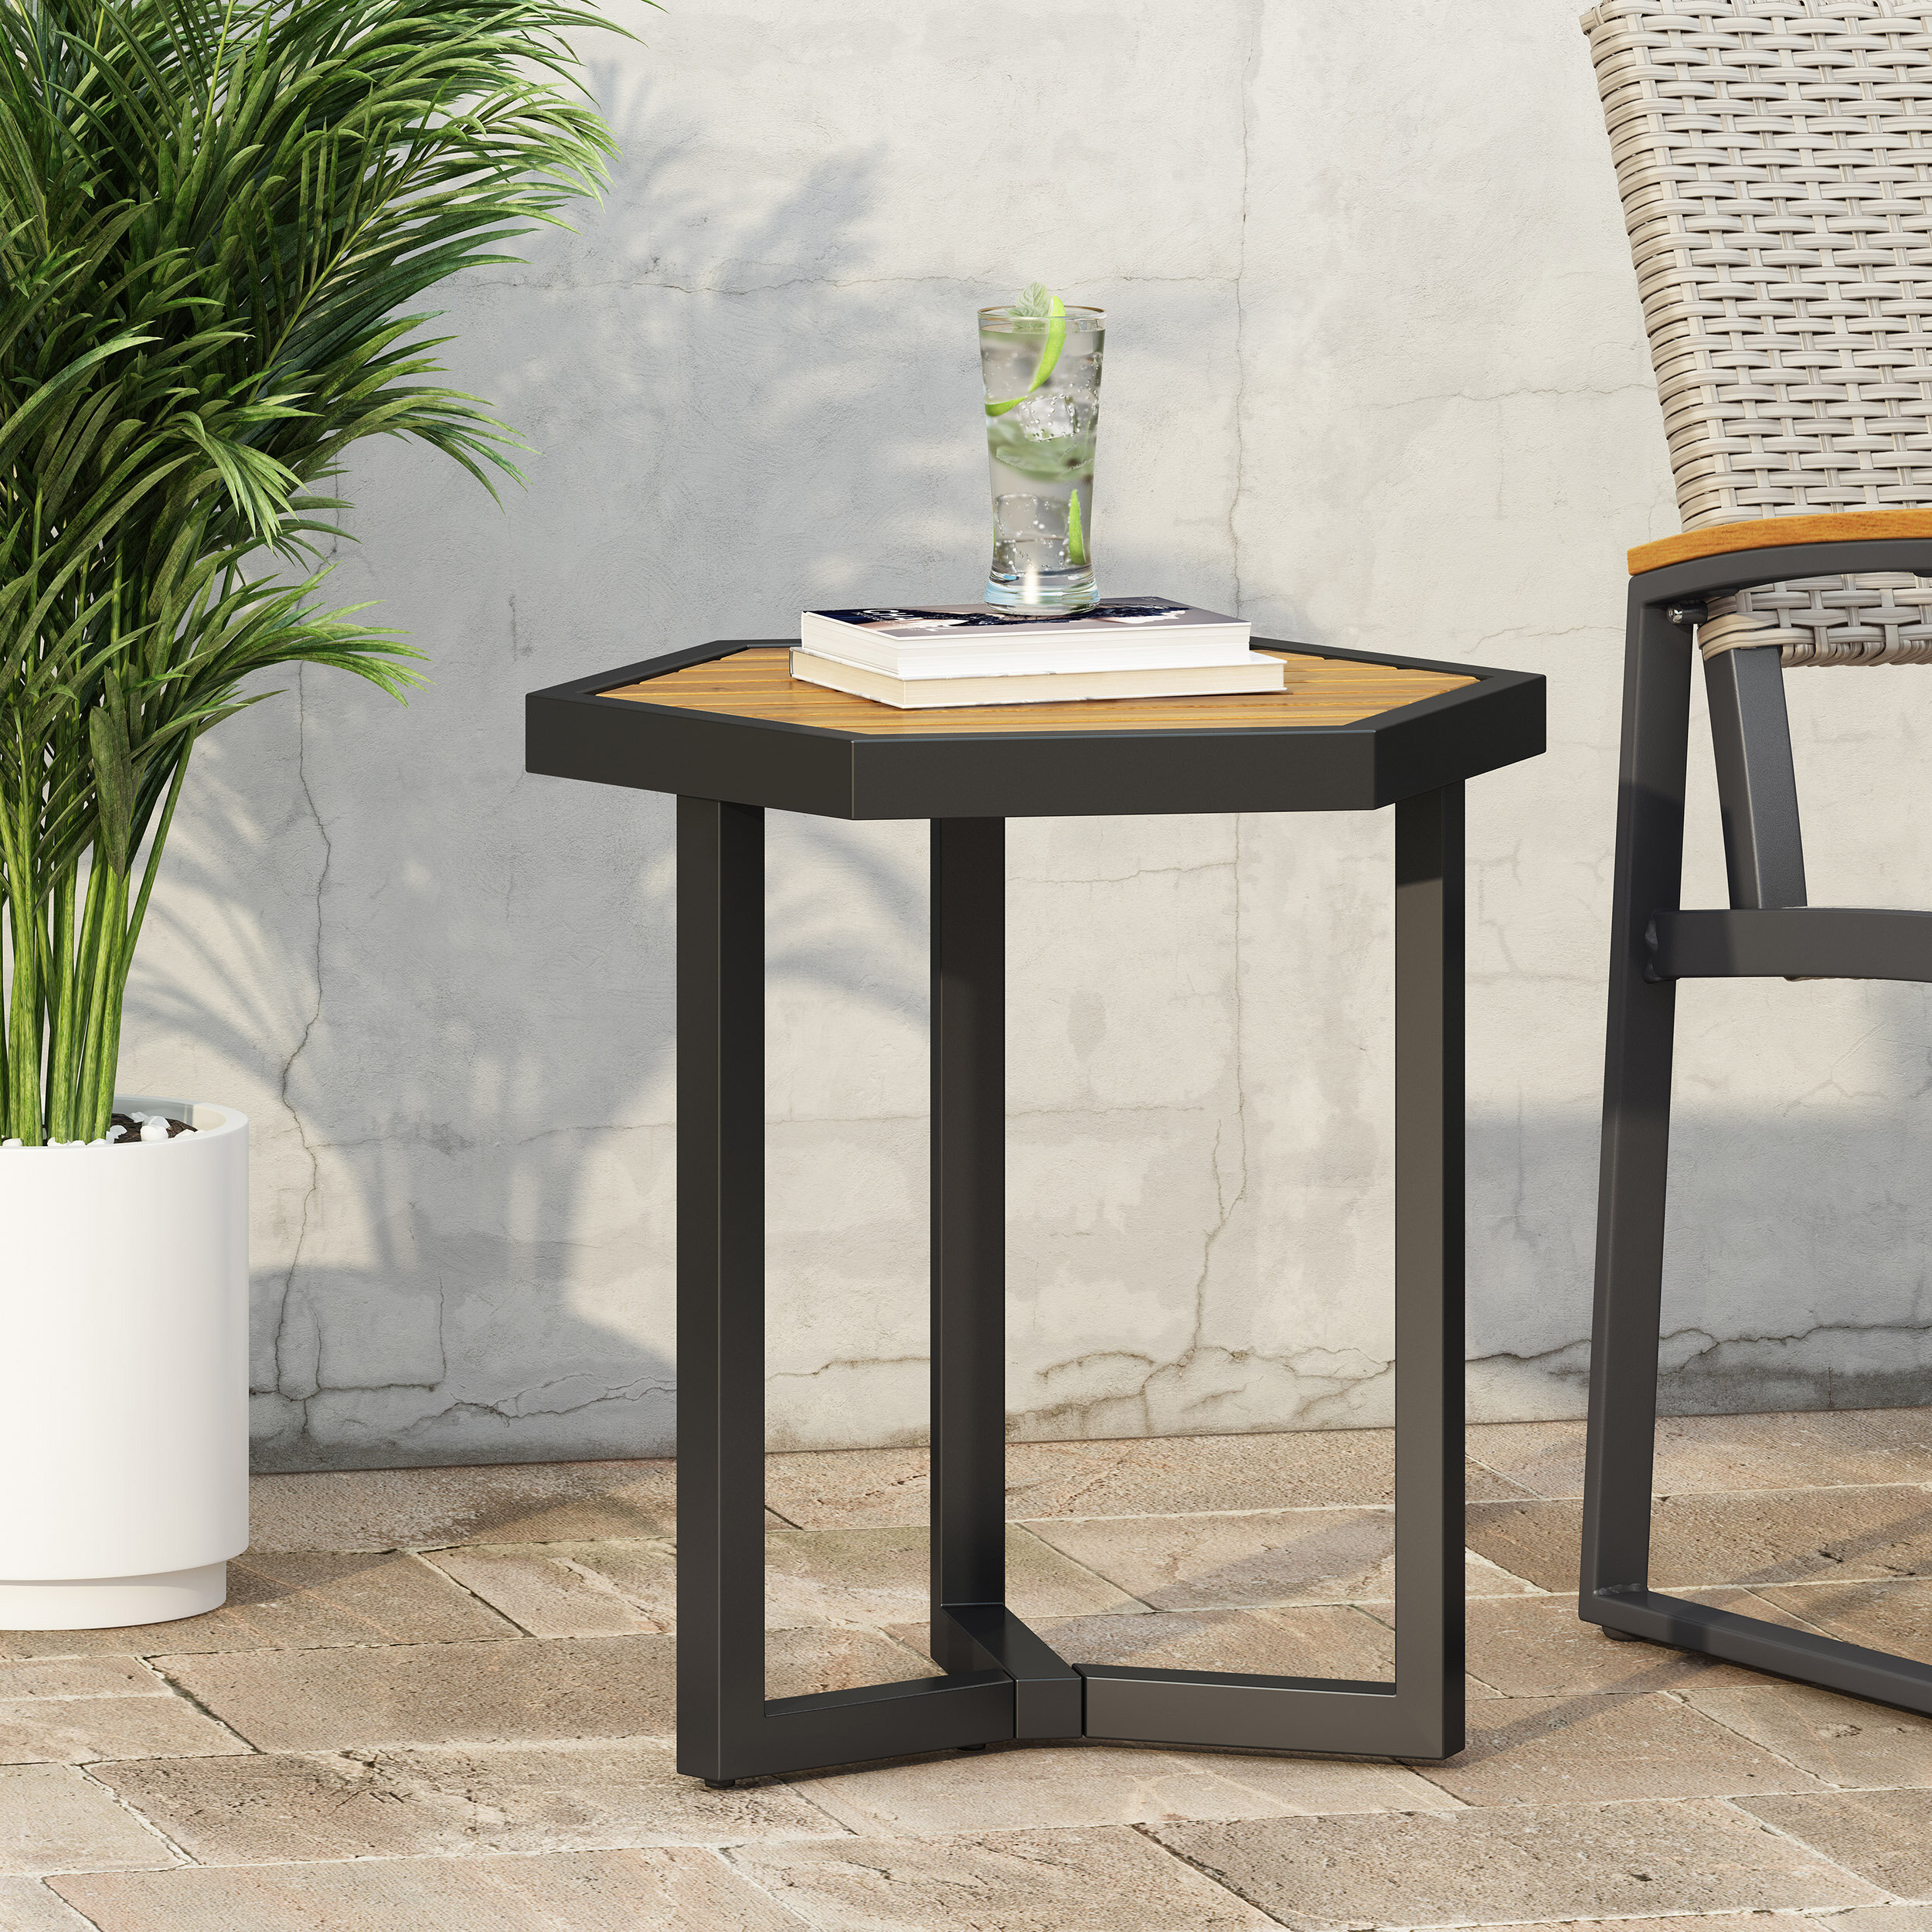 Plant Stand For Small Spaces Bedroom Sofa End Table Vingli Metal Side Table Accent Table Nightstand Balcony And Office Living Room Dining Room Side Tables Kolenik Patio Lawn Garden